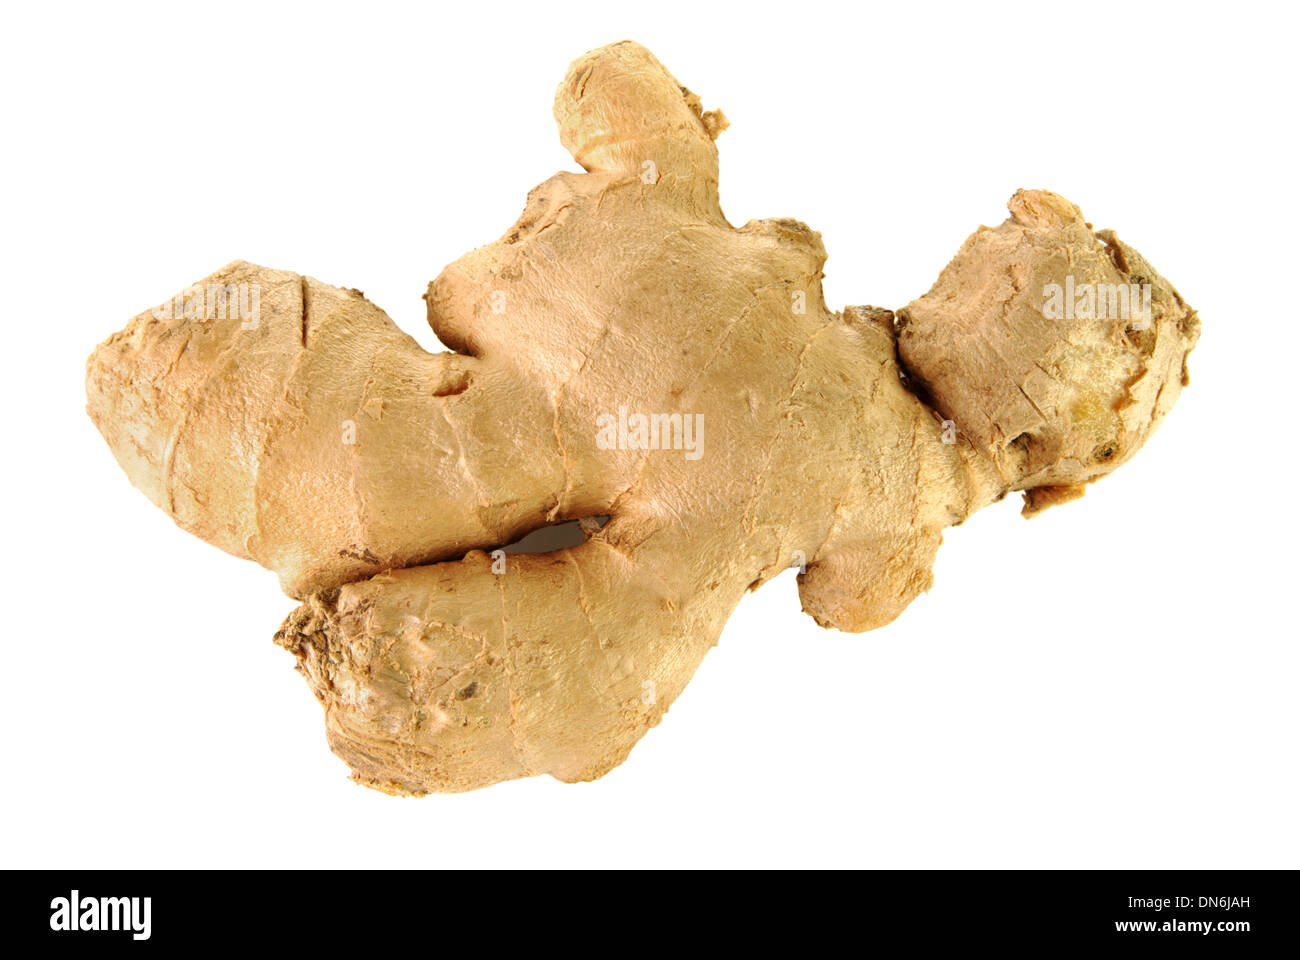 Raw ginger root on a white background Stock Photo